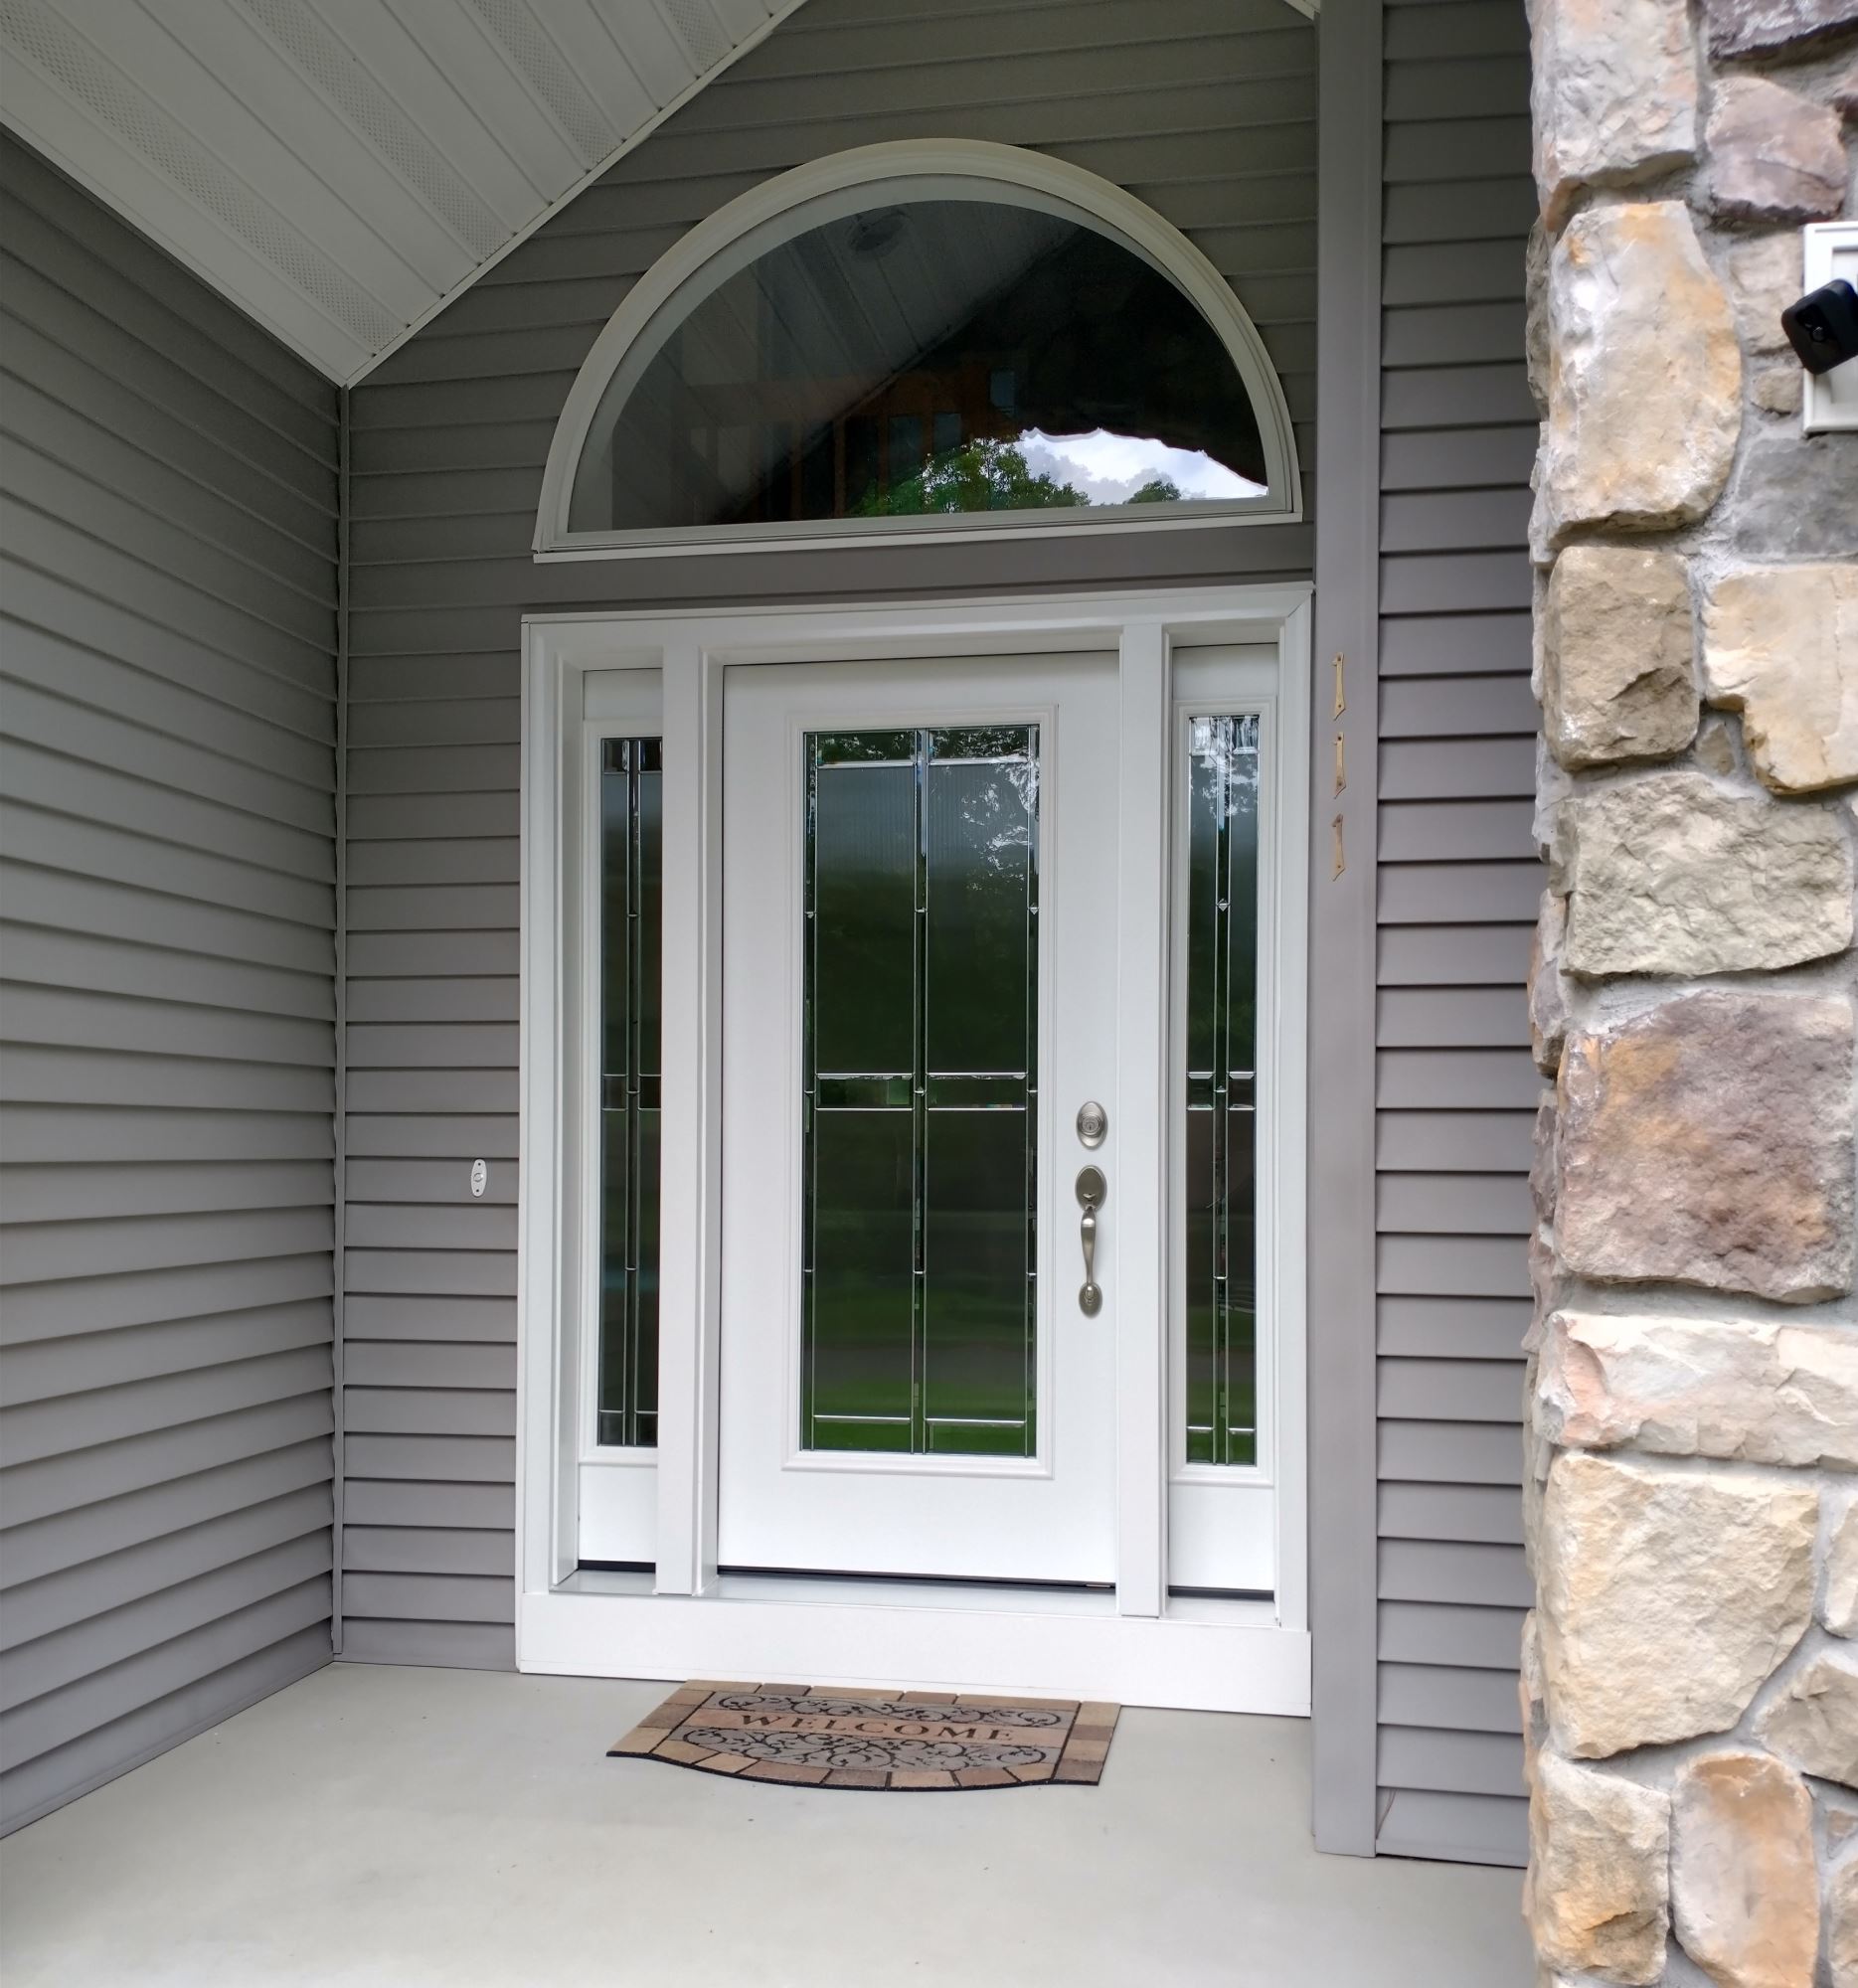 After exterior shot of Pella replacement entry door for Ludlow home